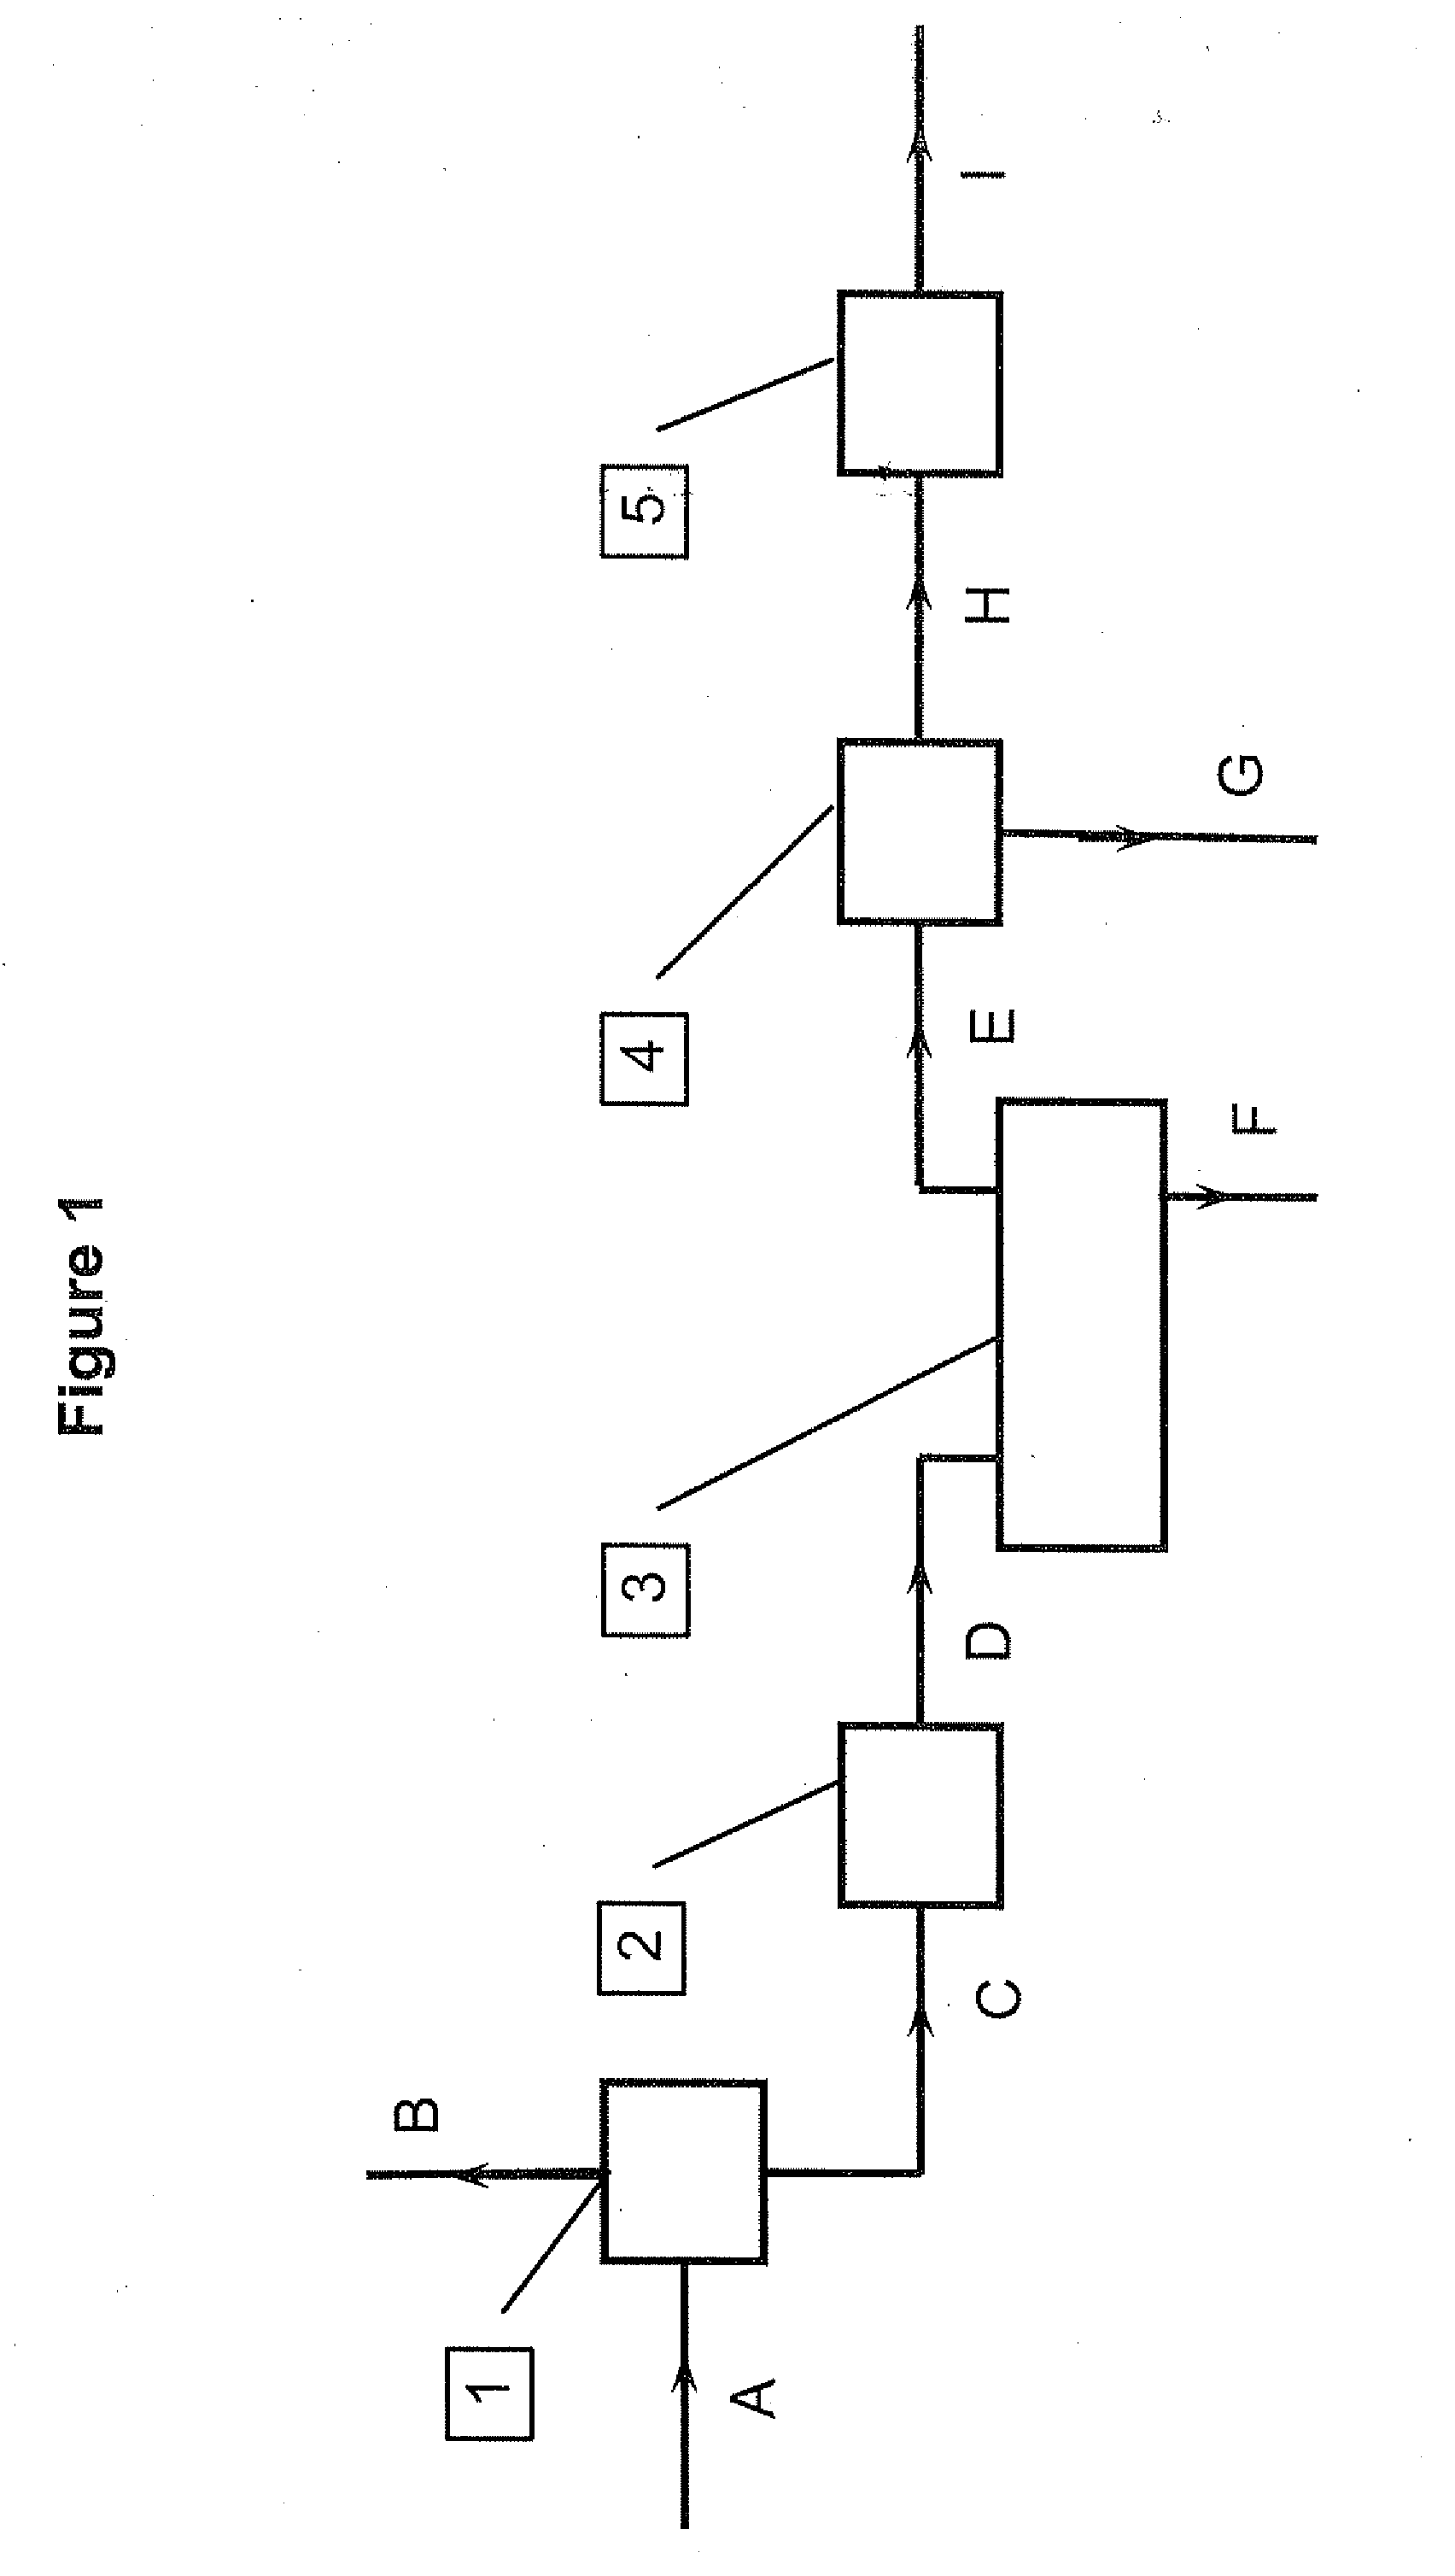 Separation improvement in a method of producing alkyl esters from vegetable or animal oil and an aliphatic monoalcohol